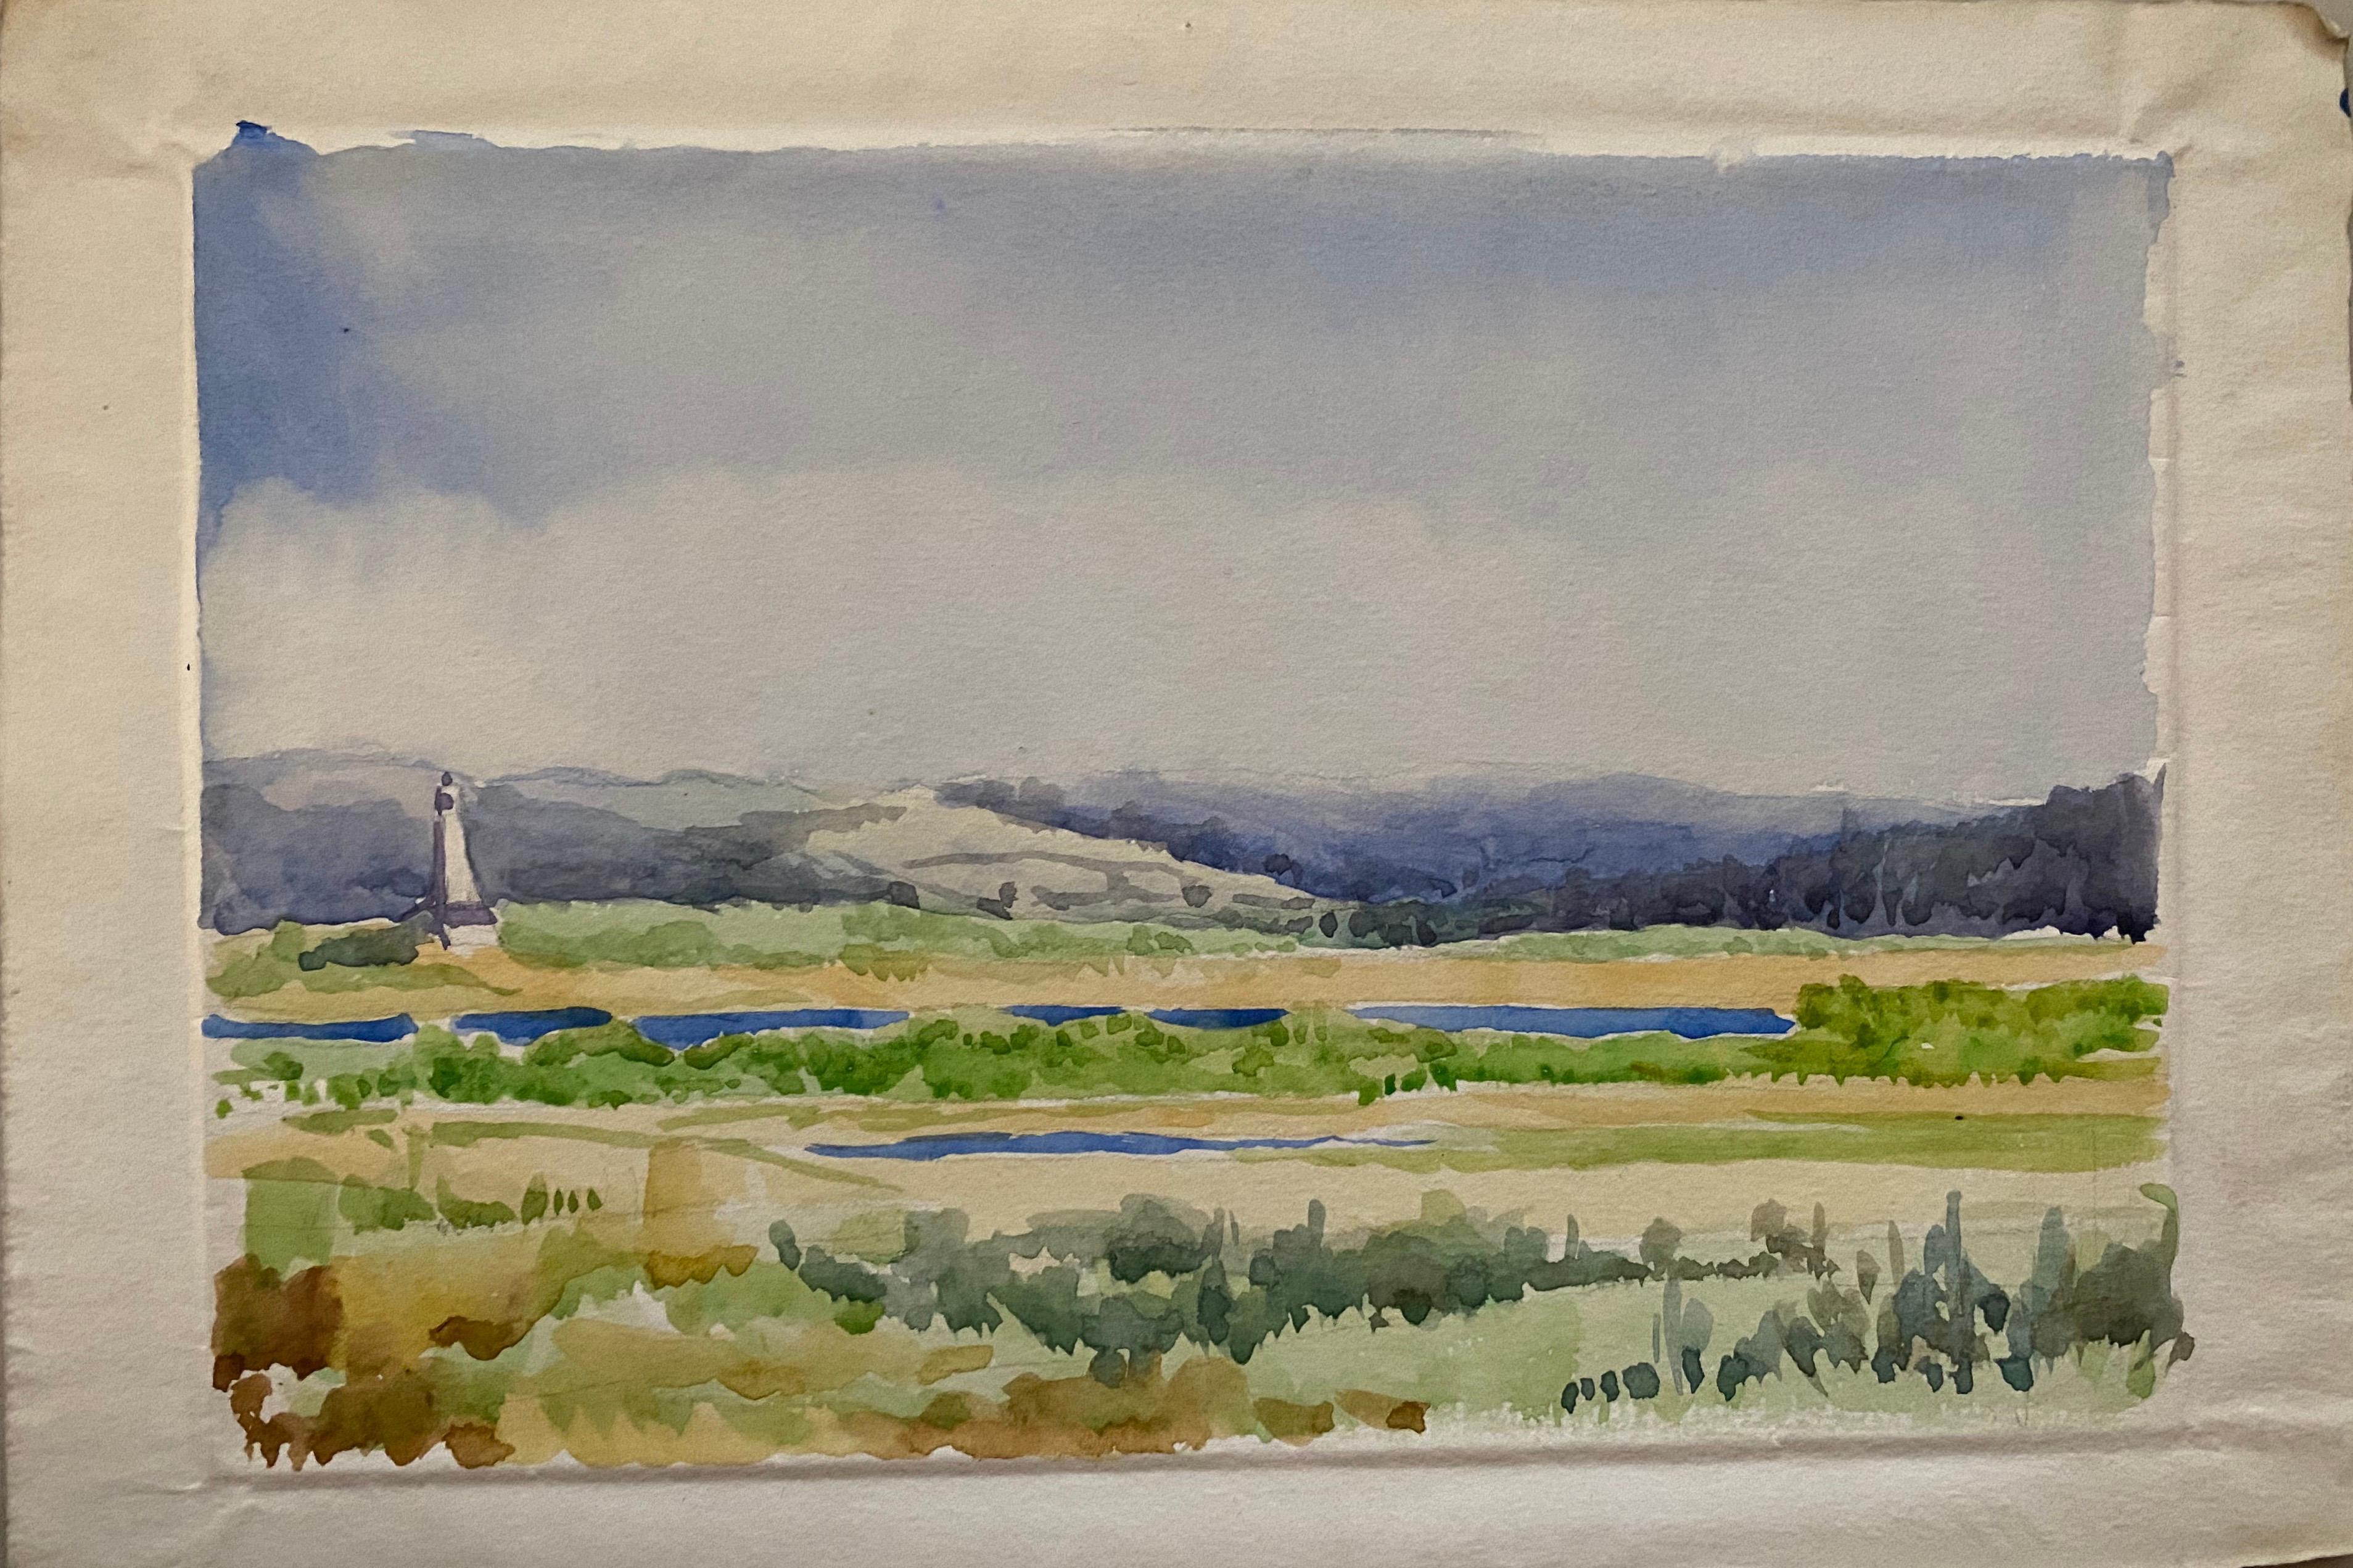 Green and blue meadows.
English school, early 1900's.
Original watercolor painting on artists paper, unframed.
Overall paper size: 7.5 x 11 inches.




From a large private collection of English watercolor paintings, all by the same hand, we